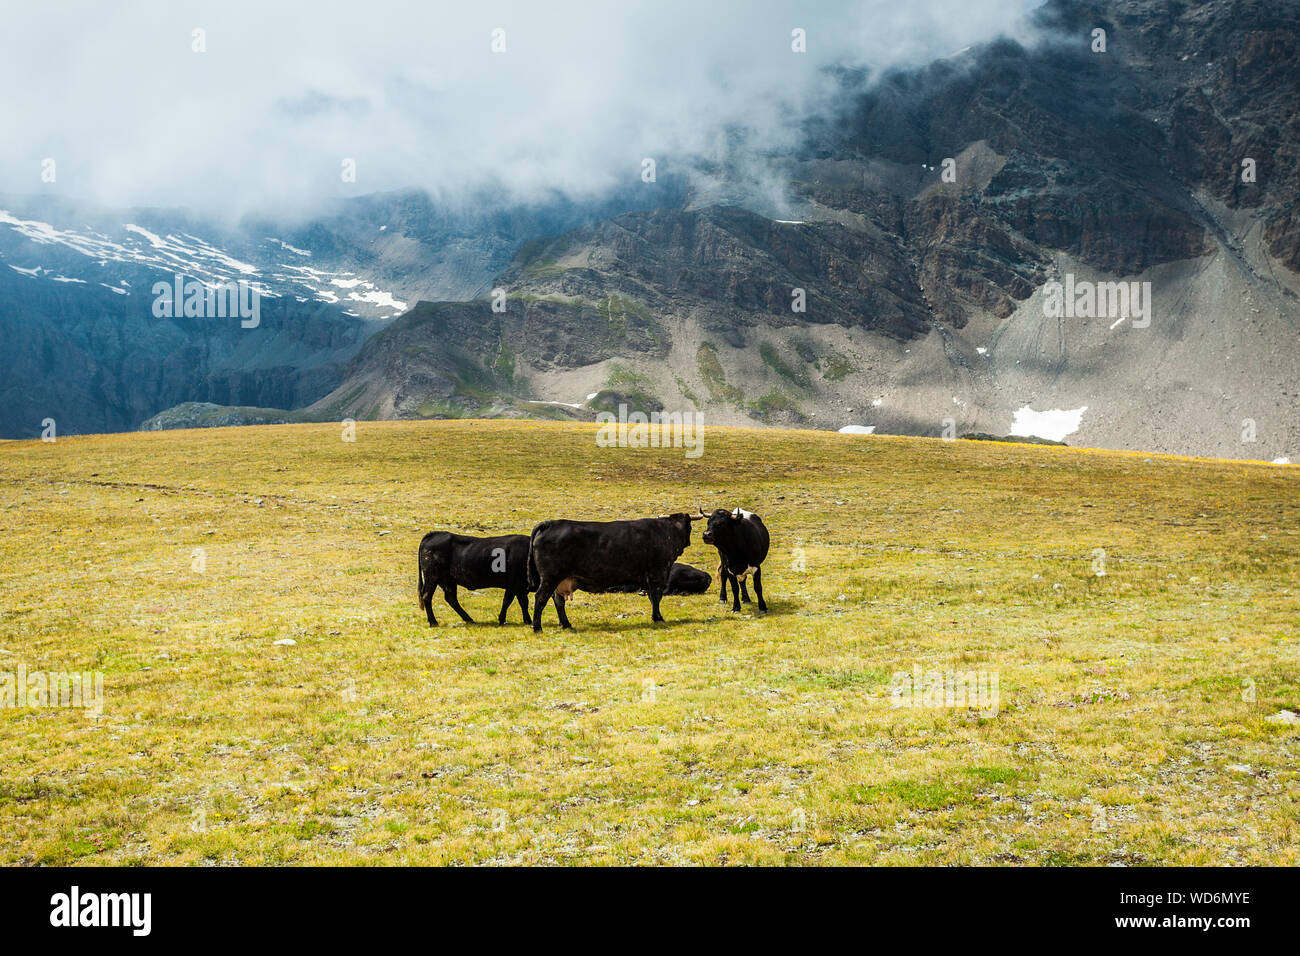 Cows On Grassy Field Against Mountains At Gran Paradiso National Park Stock Photo